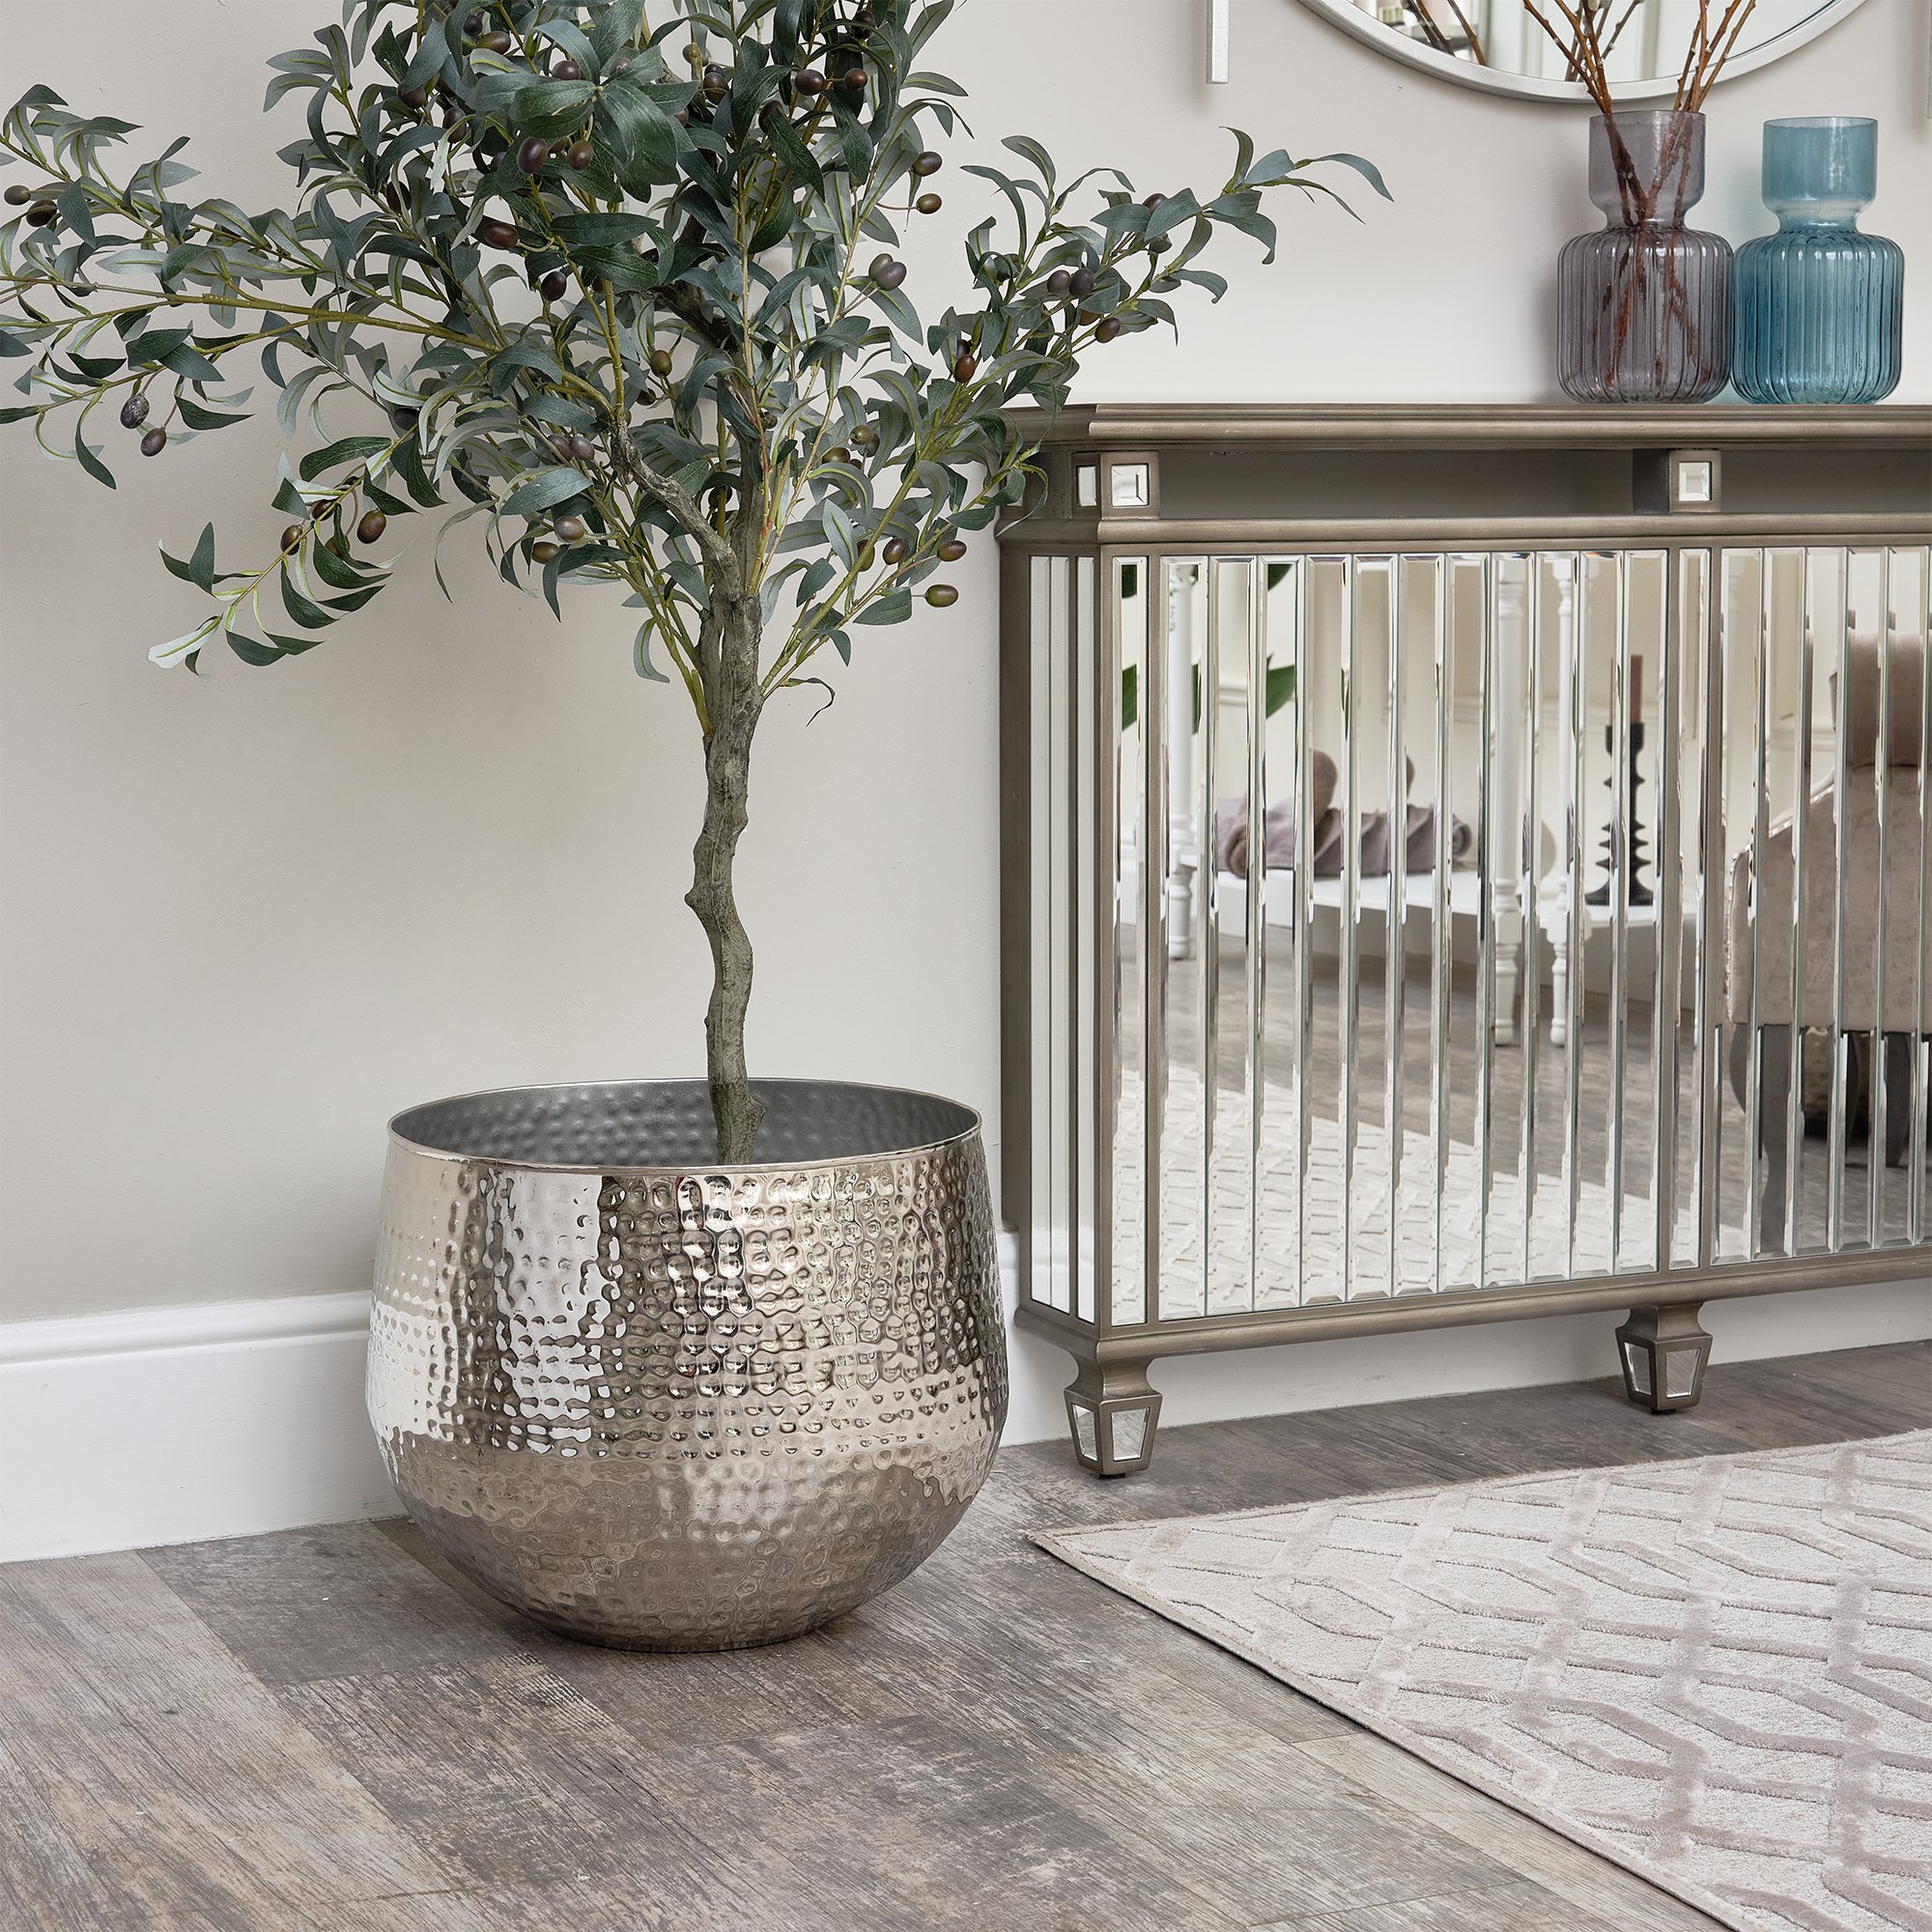 10.MELODY MAISON Large Silver Hammered Metal Planter €59.56, 